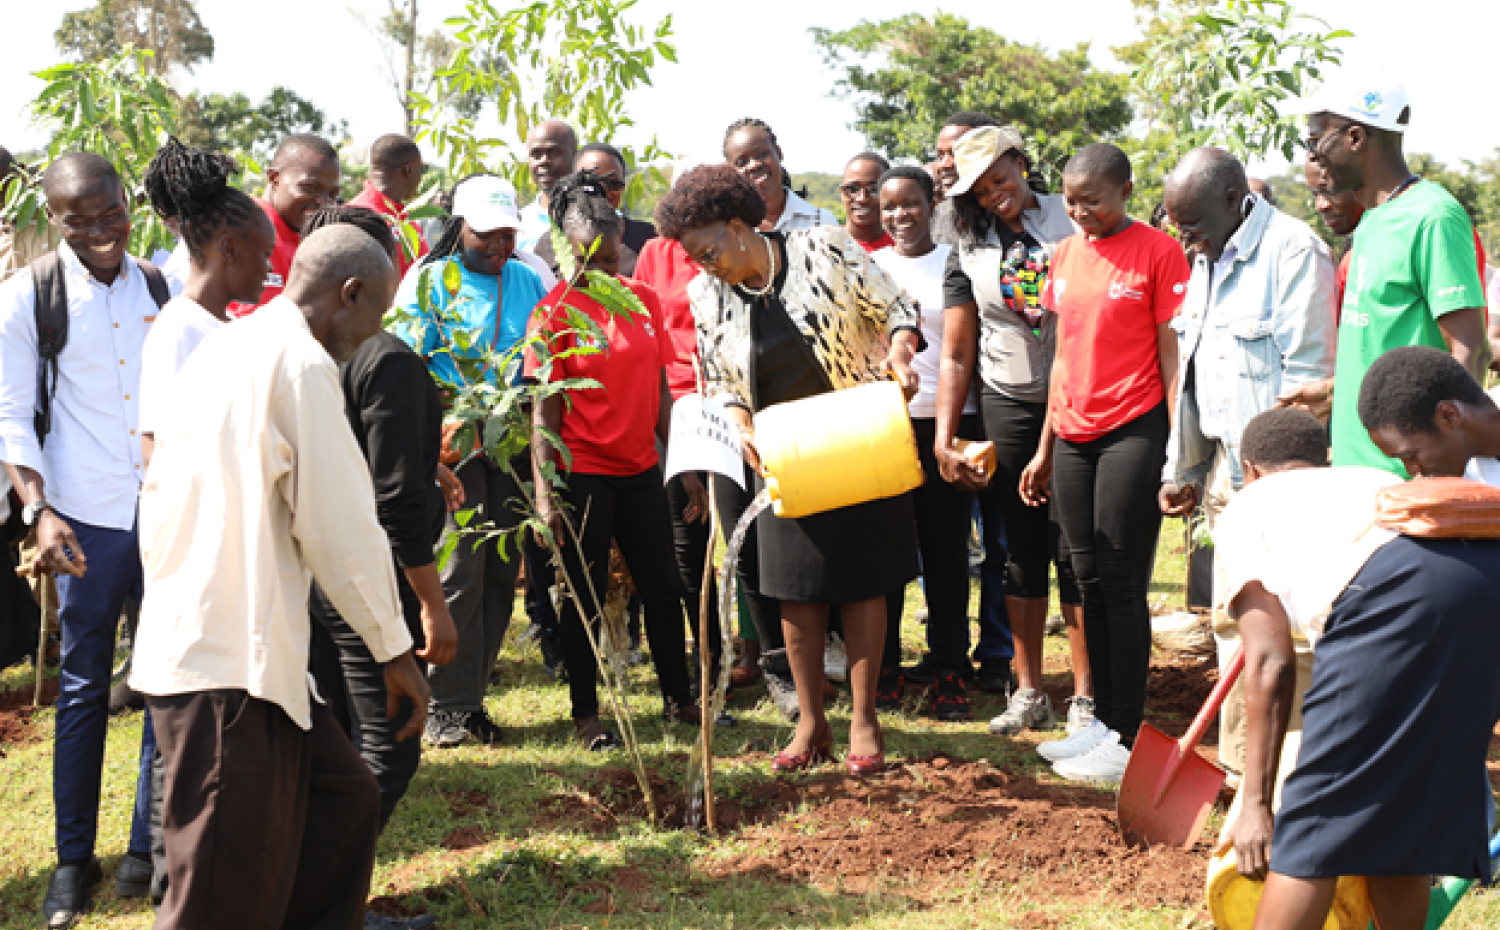 MMUST Officially Launches Tree Planting Initiative in Kakamega Forest as It Leads the ‘Green Revolution’ Across the Country